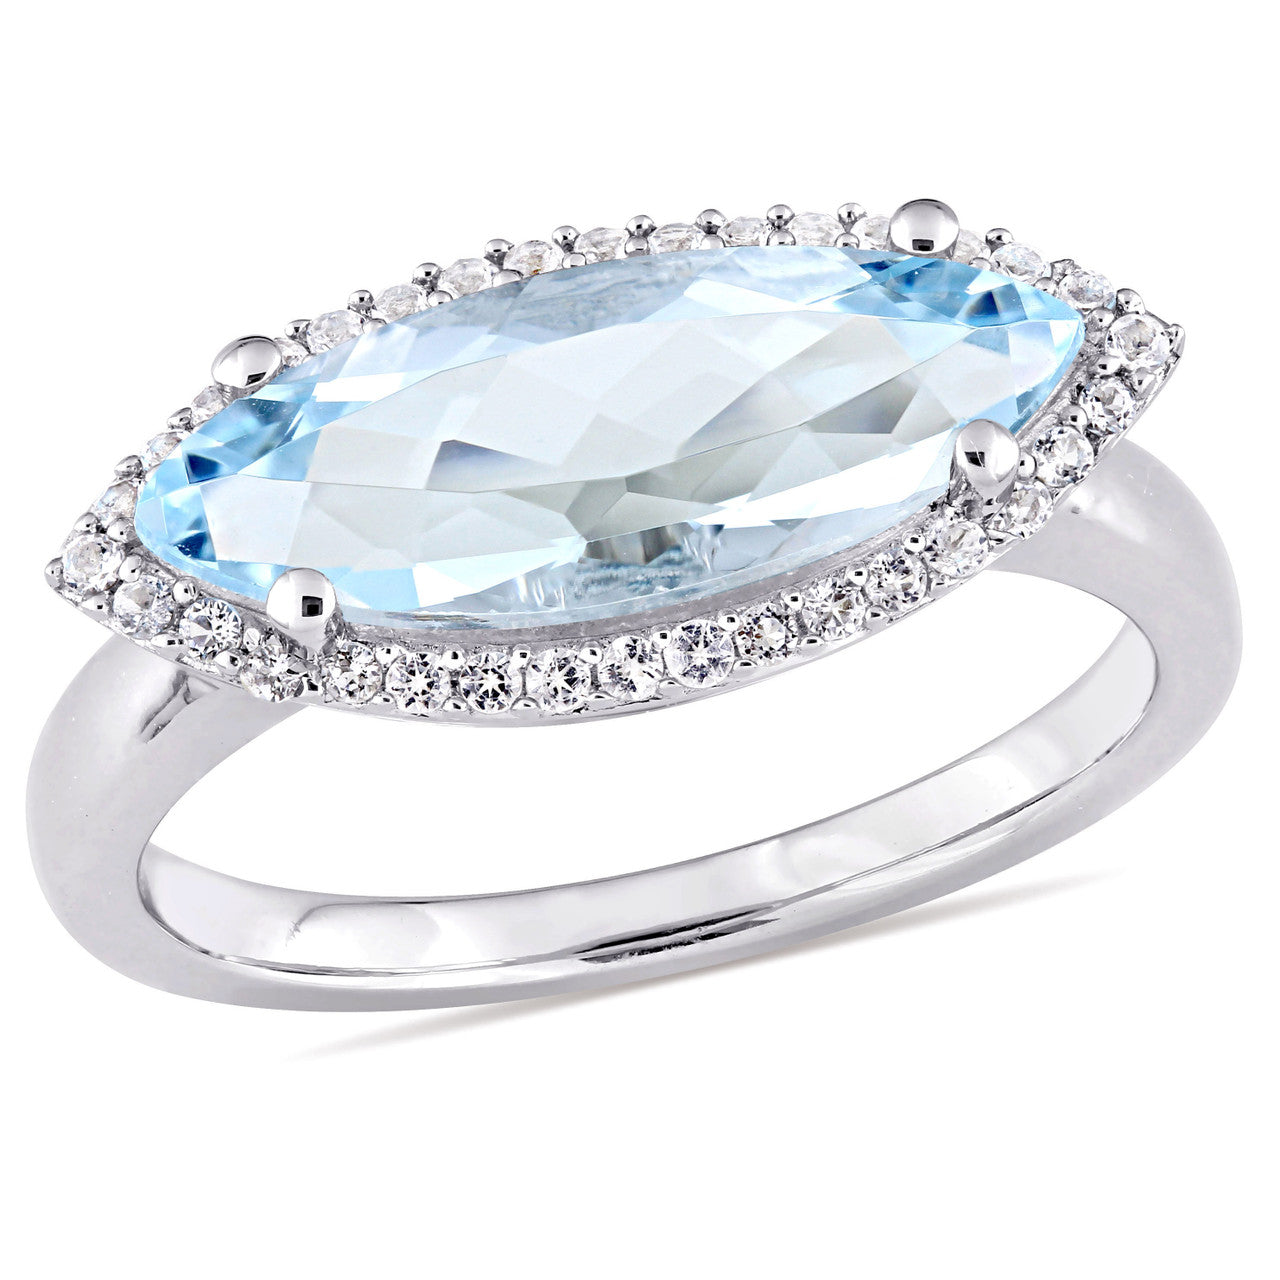 Ice Jewellery 2 7/8 CT Marquise Shape Blue & White Topaz Halo Ring in Sterling Silver - 75000003862 | Ice Jewellery Australia